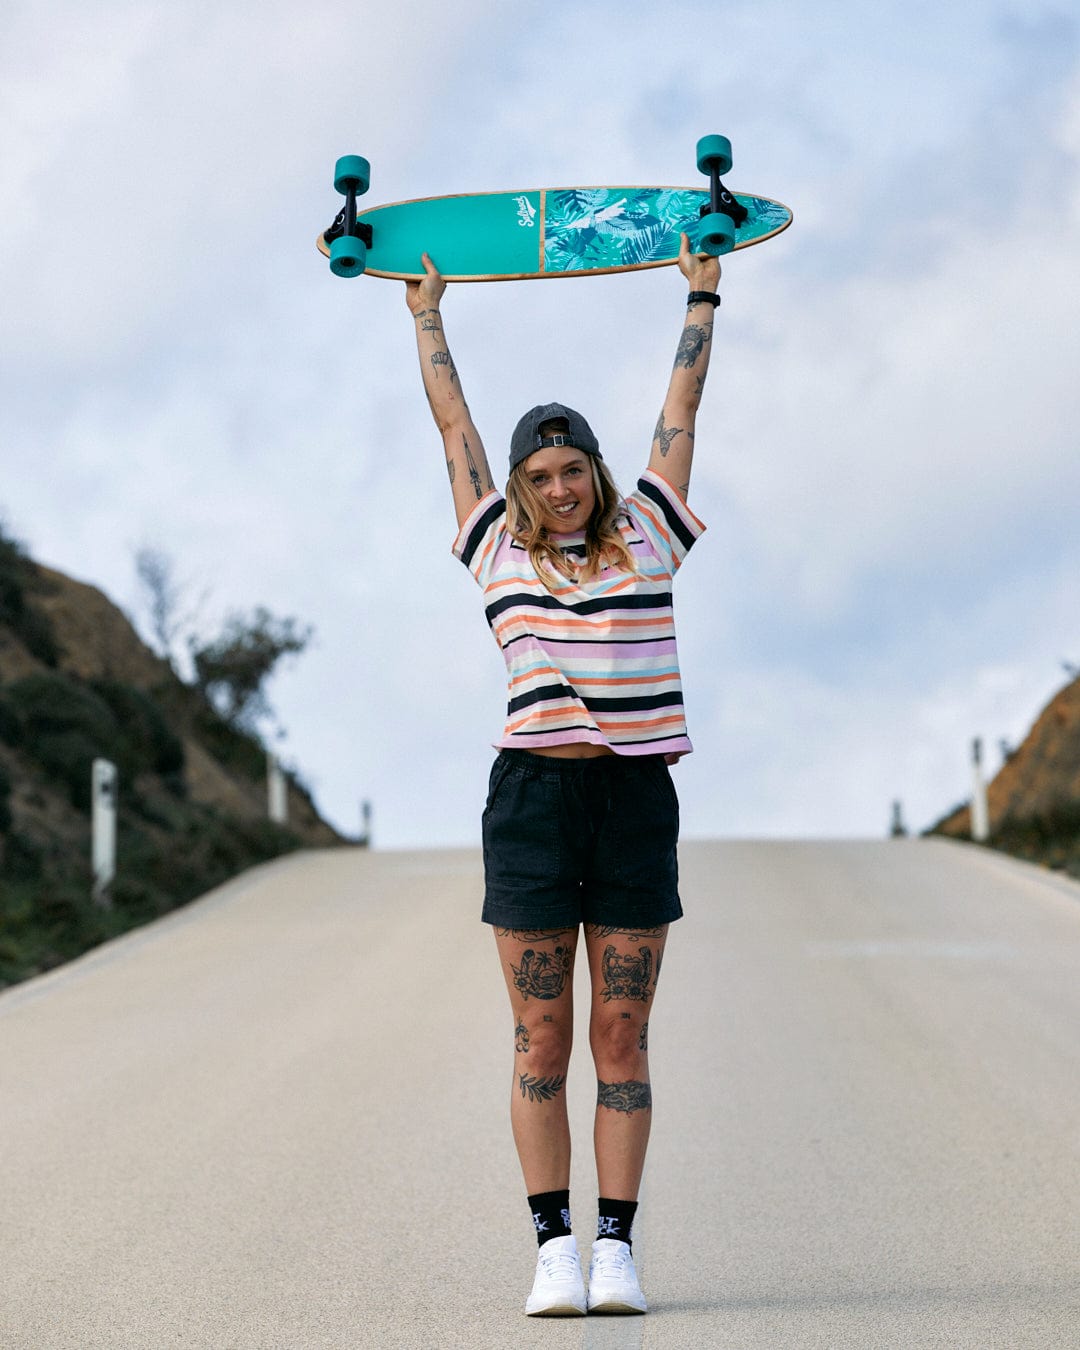 A person holding a skateboard above their head on a road, wearing a Saltrock Juno - Womens Short Sleeve T-Shirt - Multi with an embroidery stripe pattern.